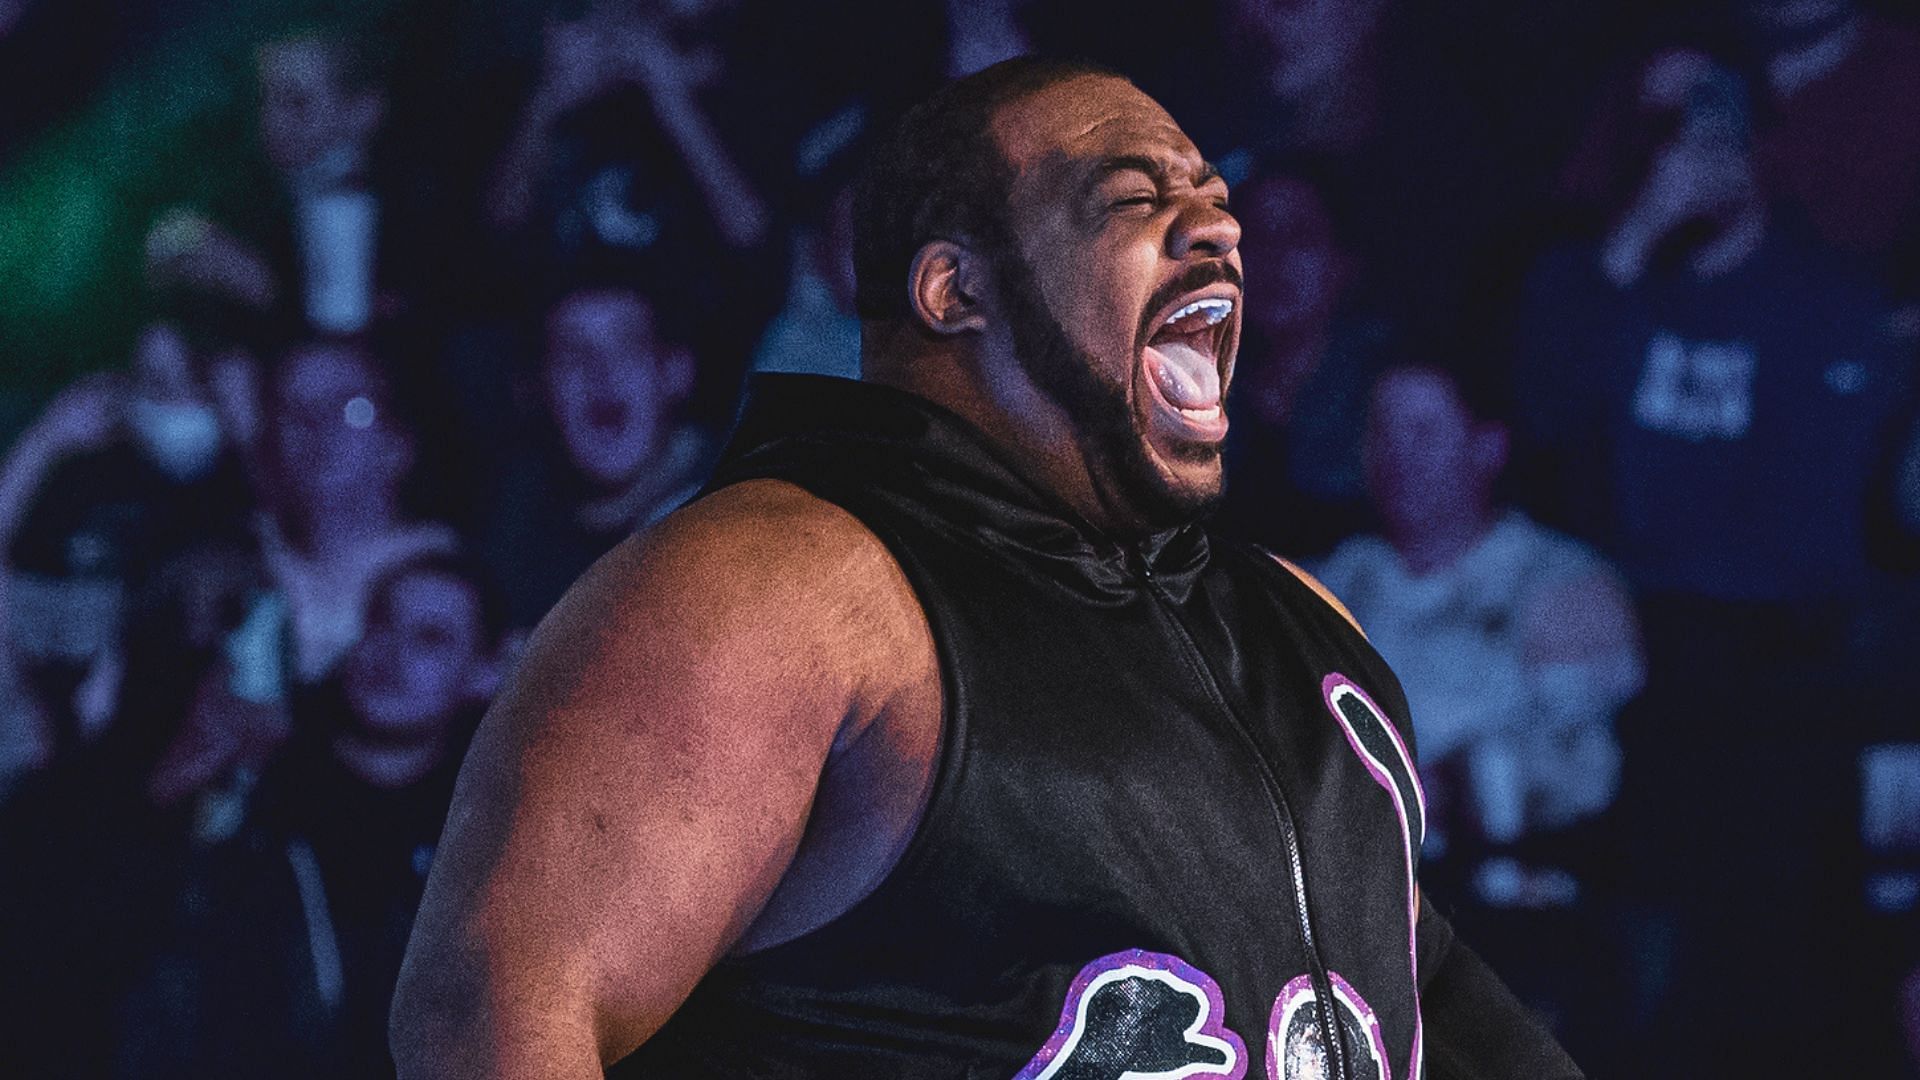 Keith Lee making his AEW debut in 2022! (credit: Jay Lee Photography)